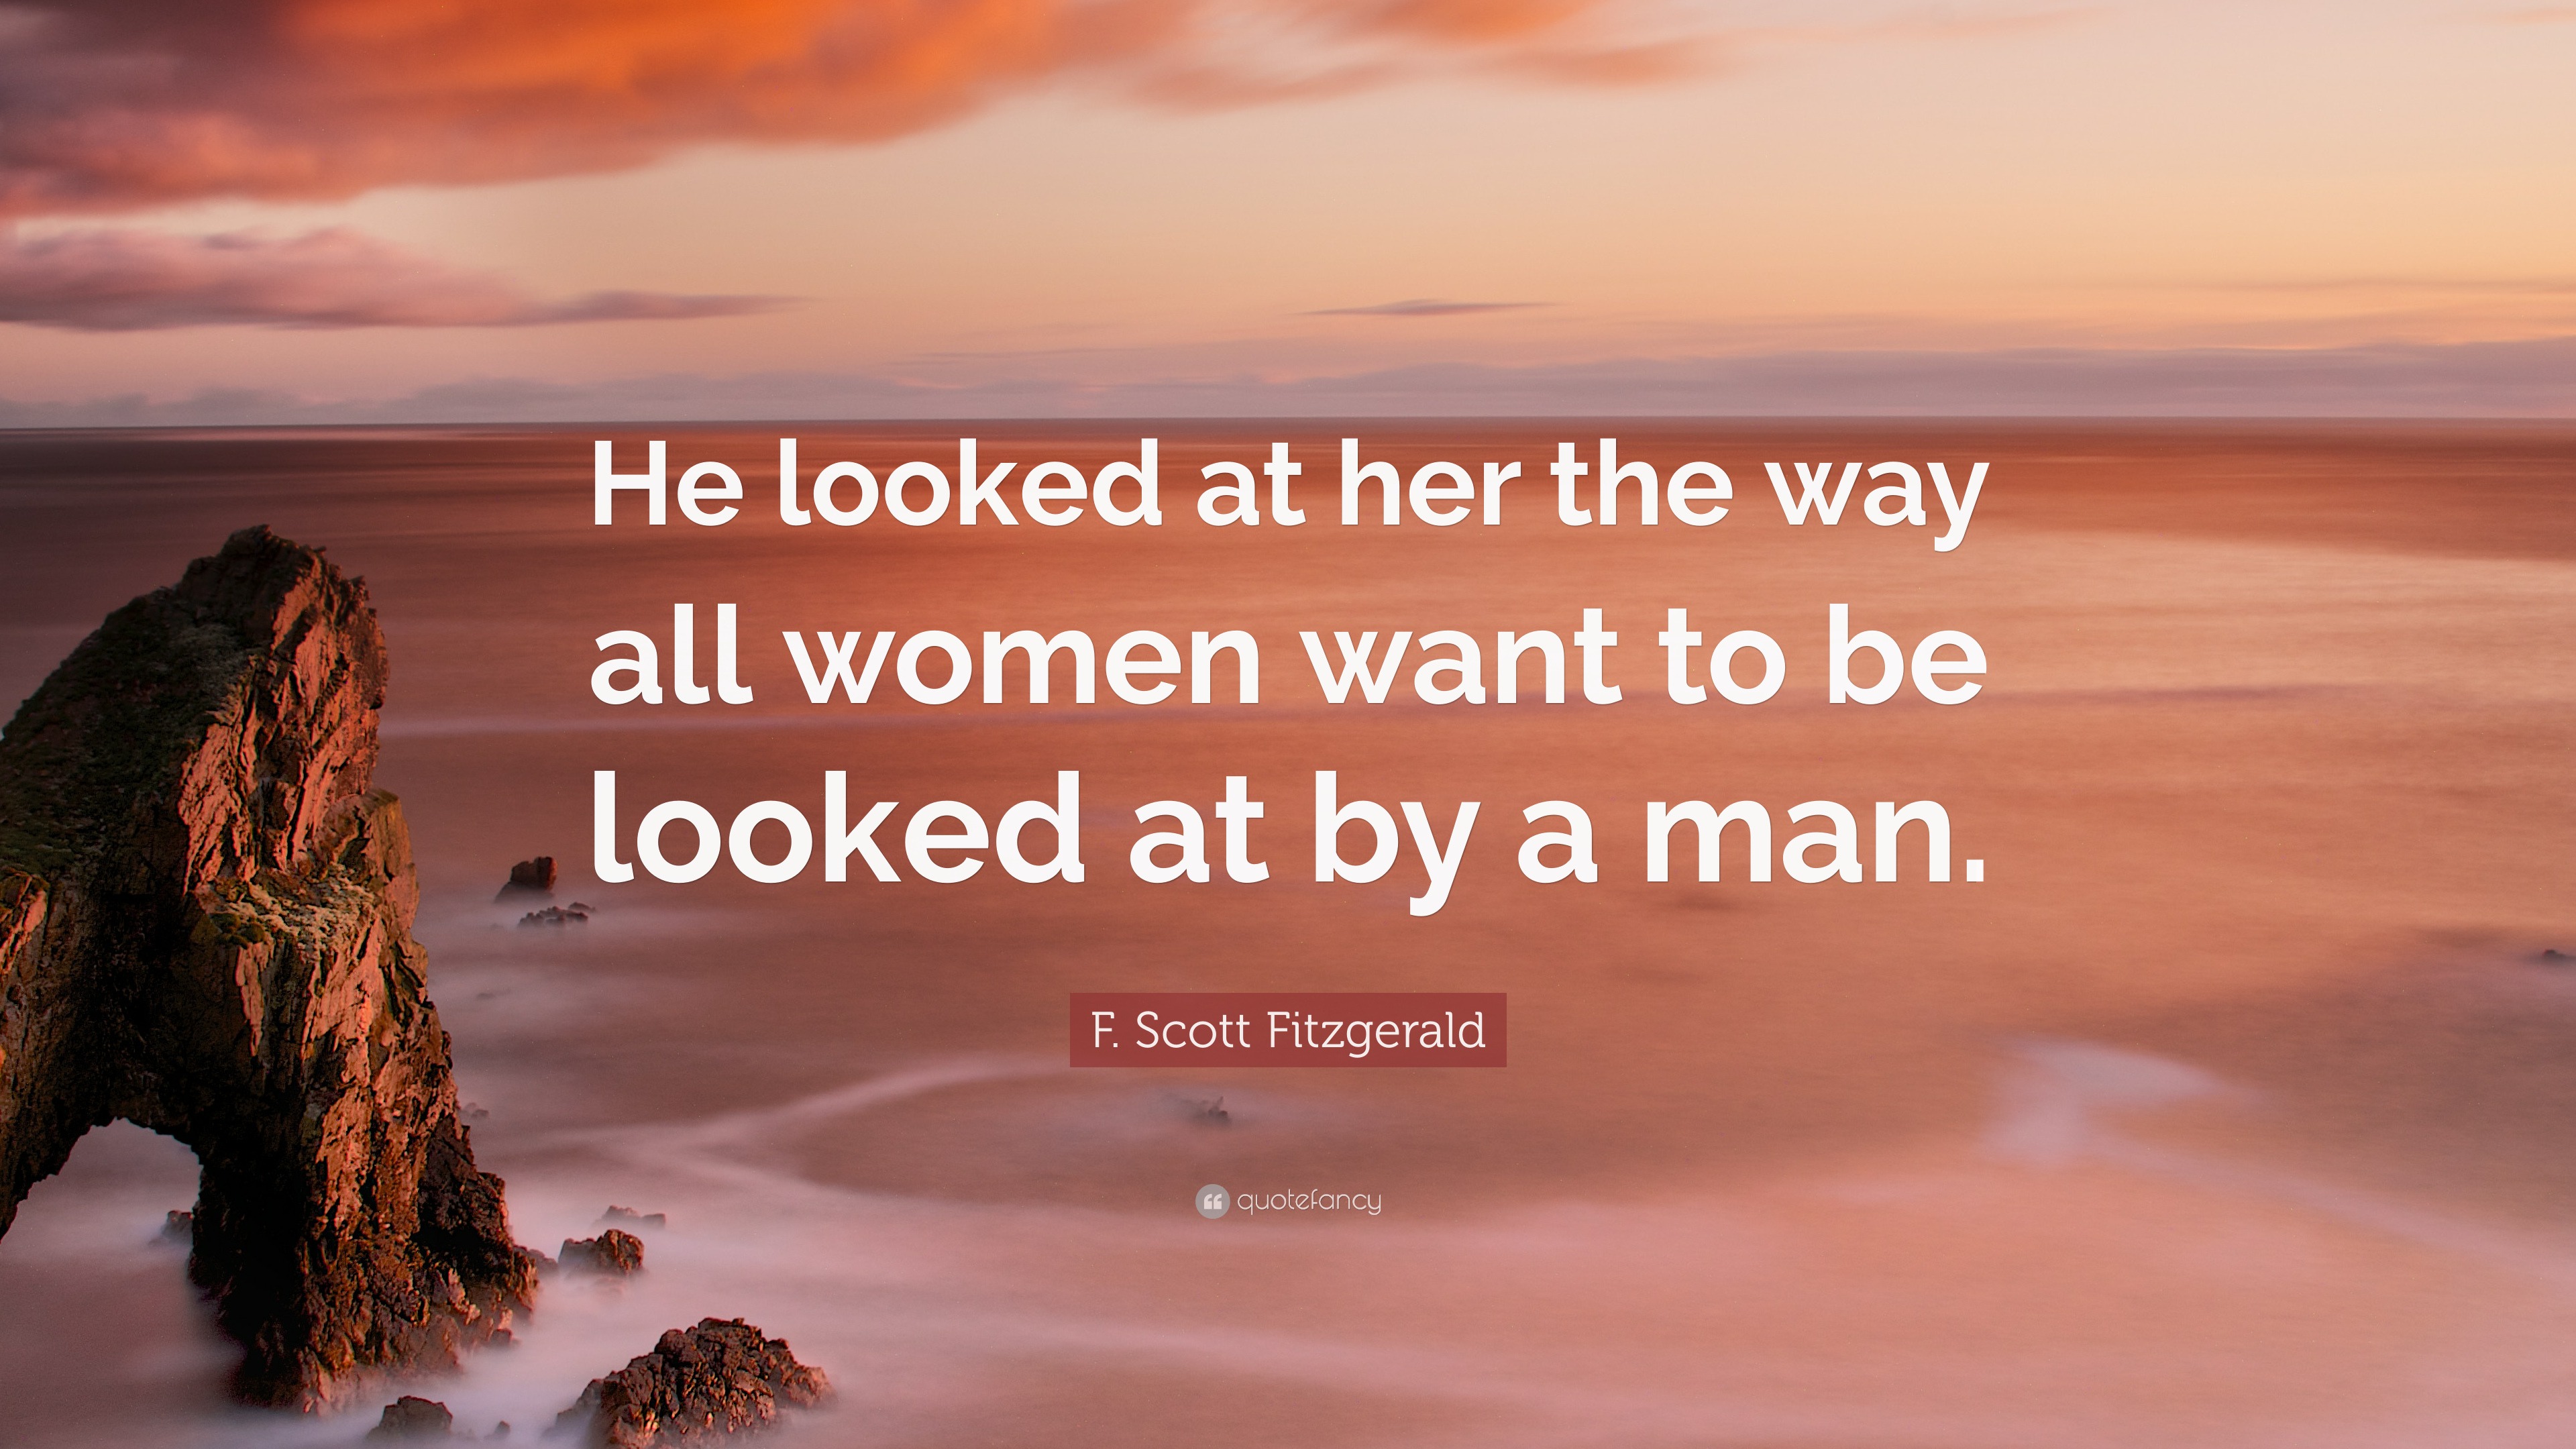 F Scott Fitzgerald Quote “he Looked At Her The Way All Women Want To